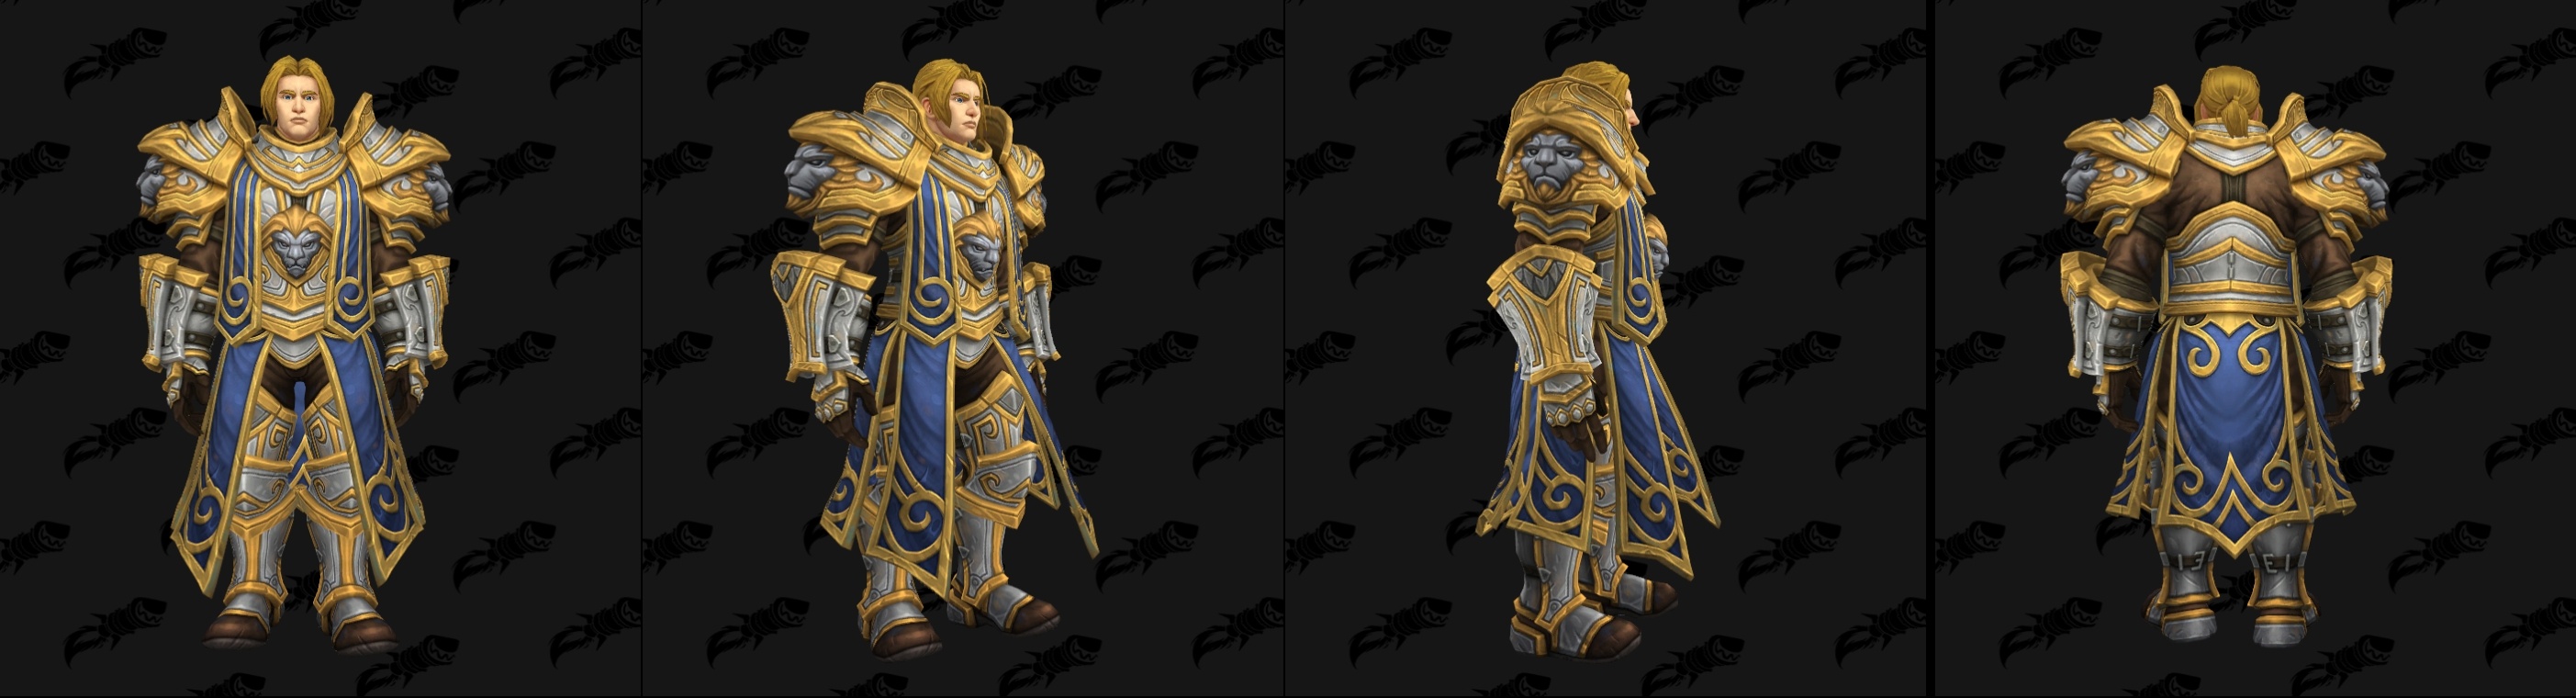 Updated Notable Npc Models In The Battle For Azeroth Pre Expansion